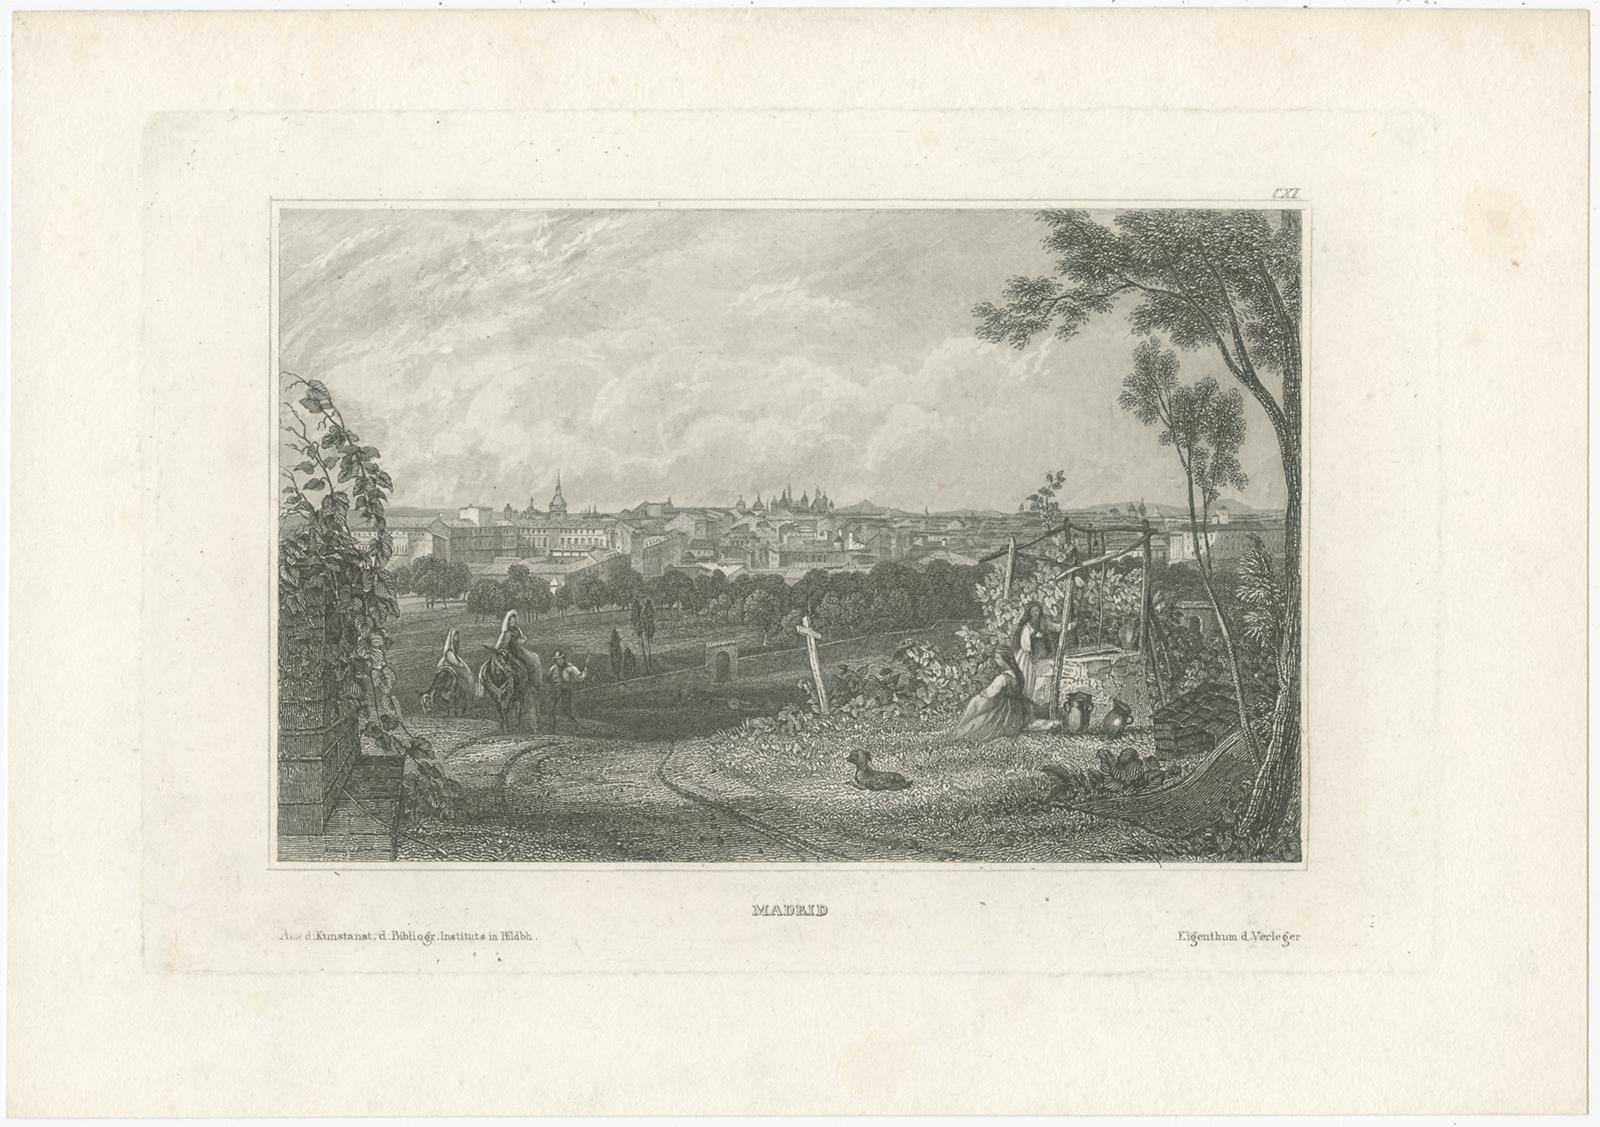 Antique print titled 'Madrid'. View of Madrid, Spain. Originates from 'Meyers Universum'. Published circa 1840. 

Joseph Meyer (May 9, 1796 - June 27, 1856) was a German industrialist and publisher, most noted for his encyclopedia, Meyers